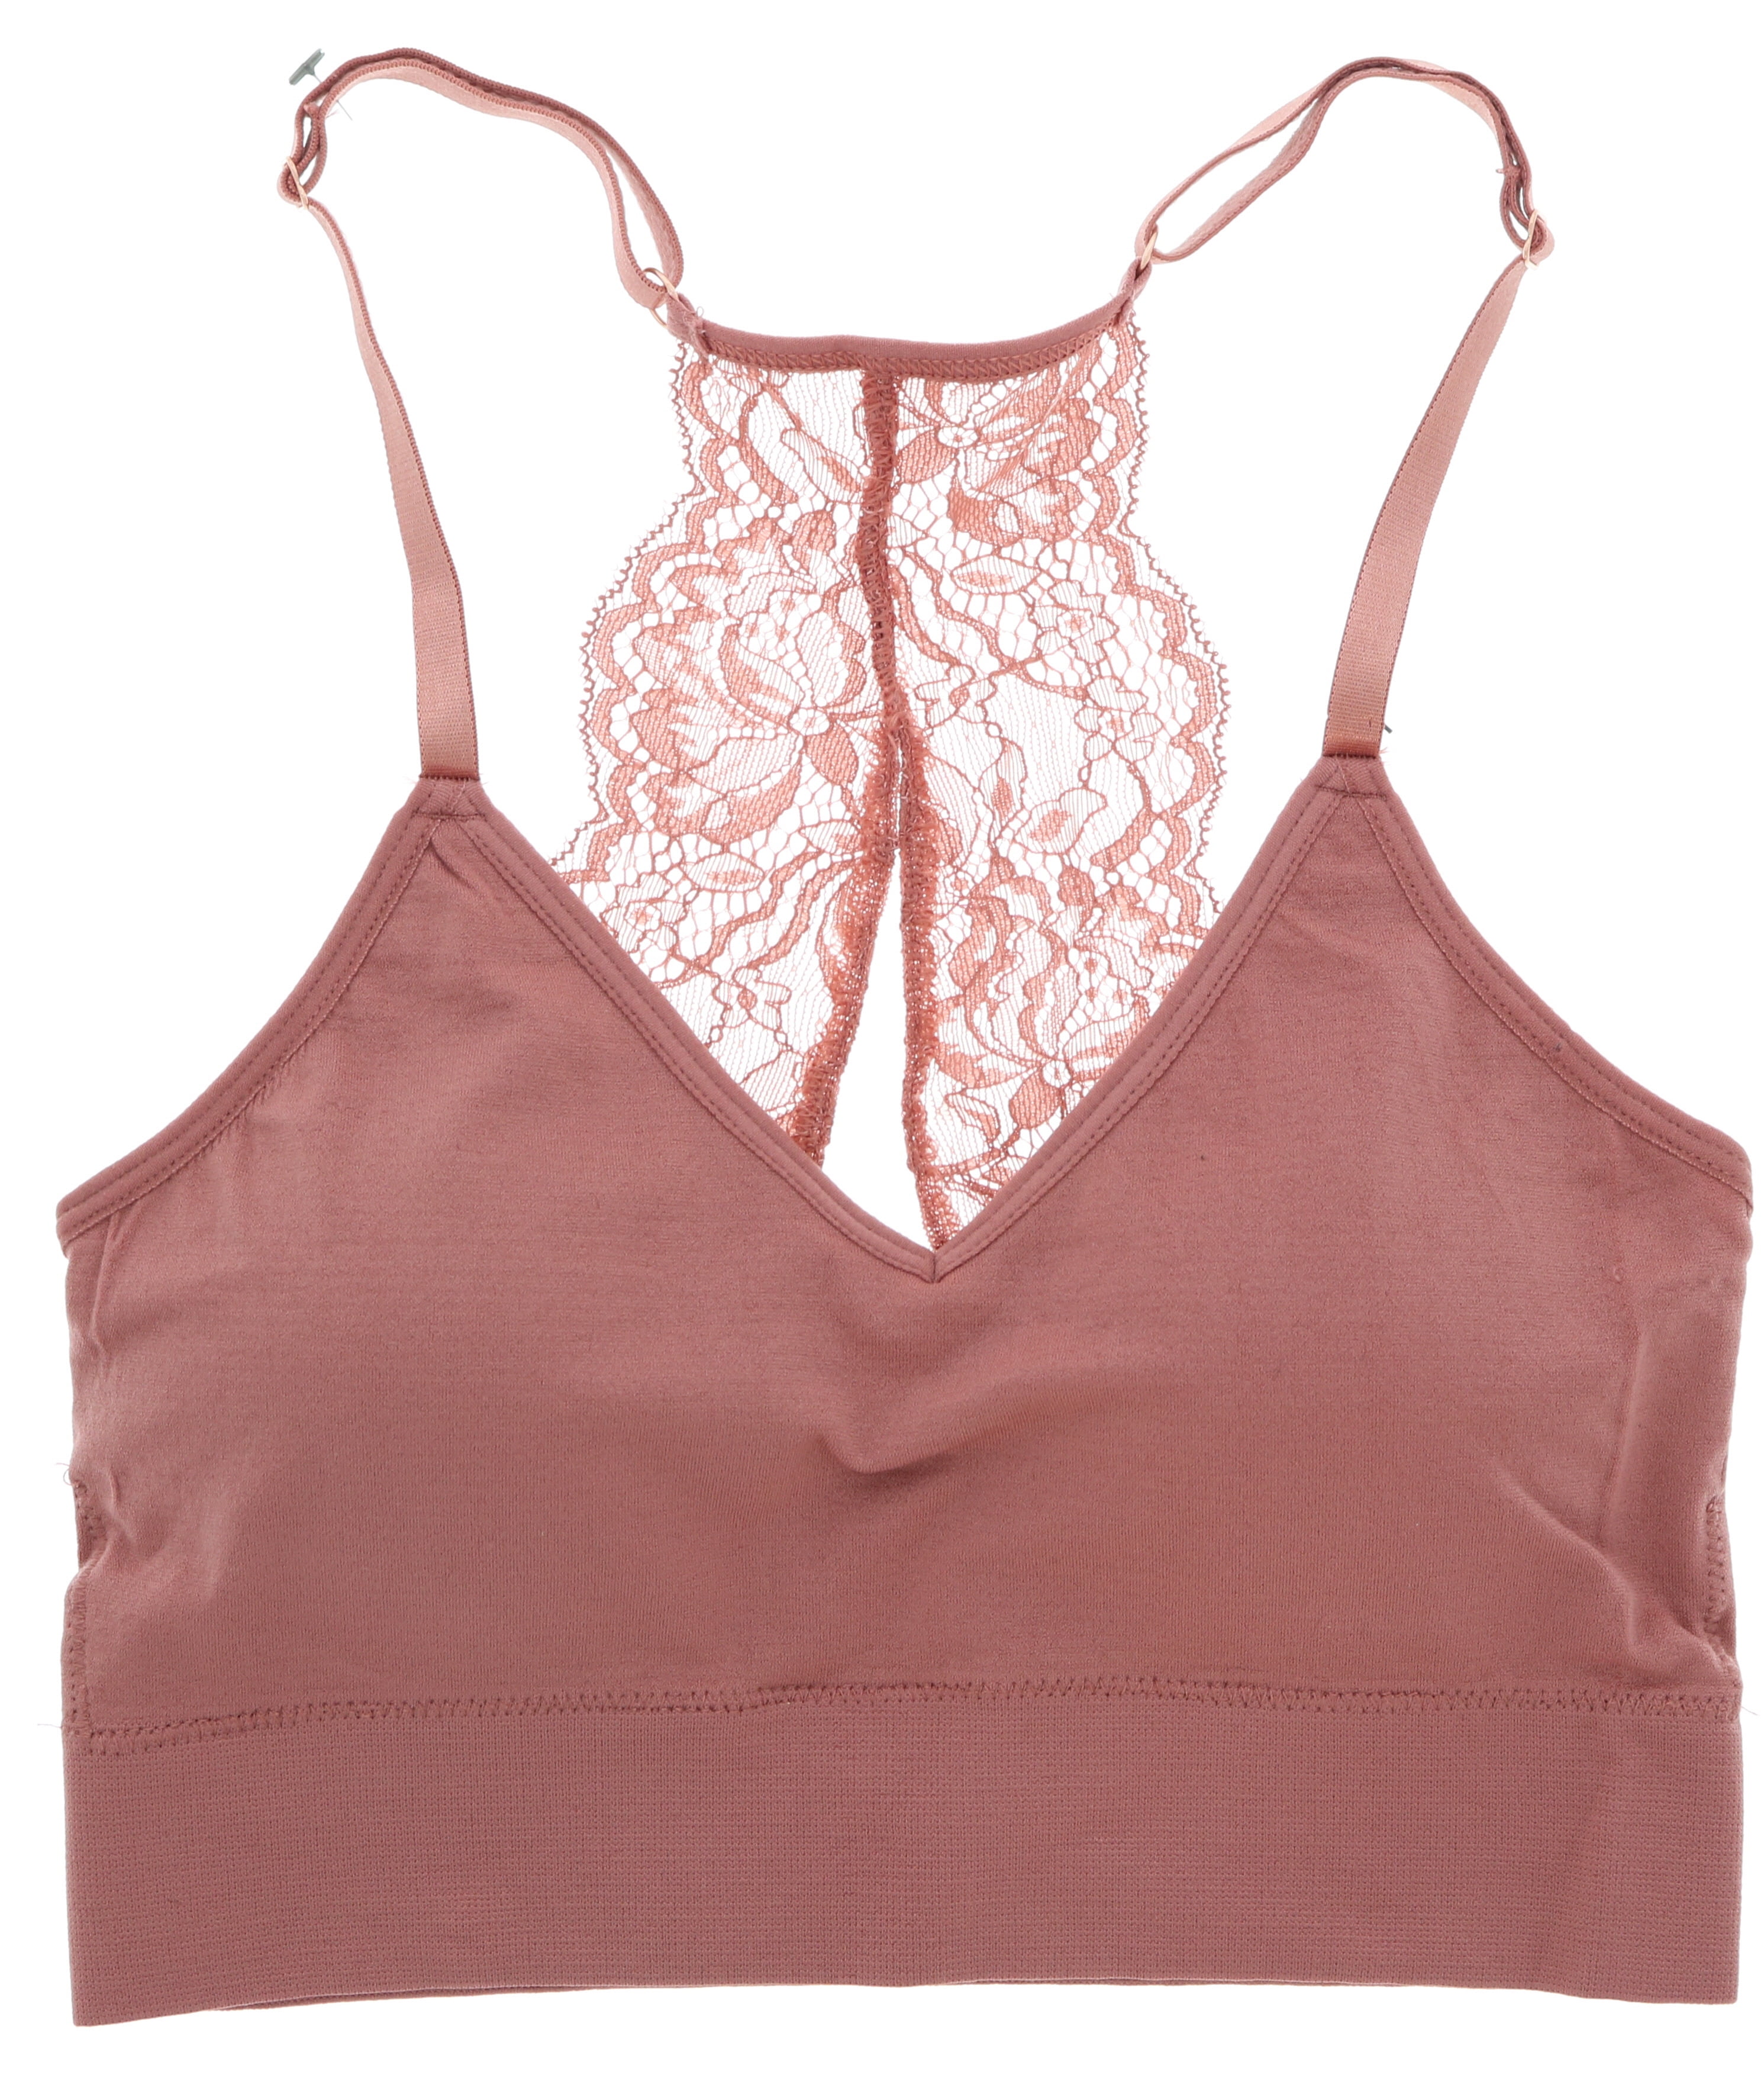 Marilyn Monroe Intimates Women's Sexy Long Line Laser-Cut Seamless Bralette  (2Pk) (as1, Alpha, s, Regular, Regular, Clay Pinks, Small) at   Women's Clothing store